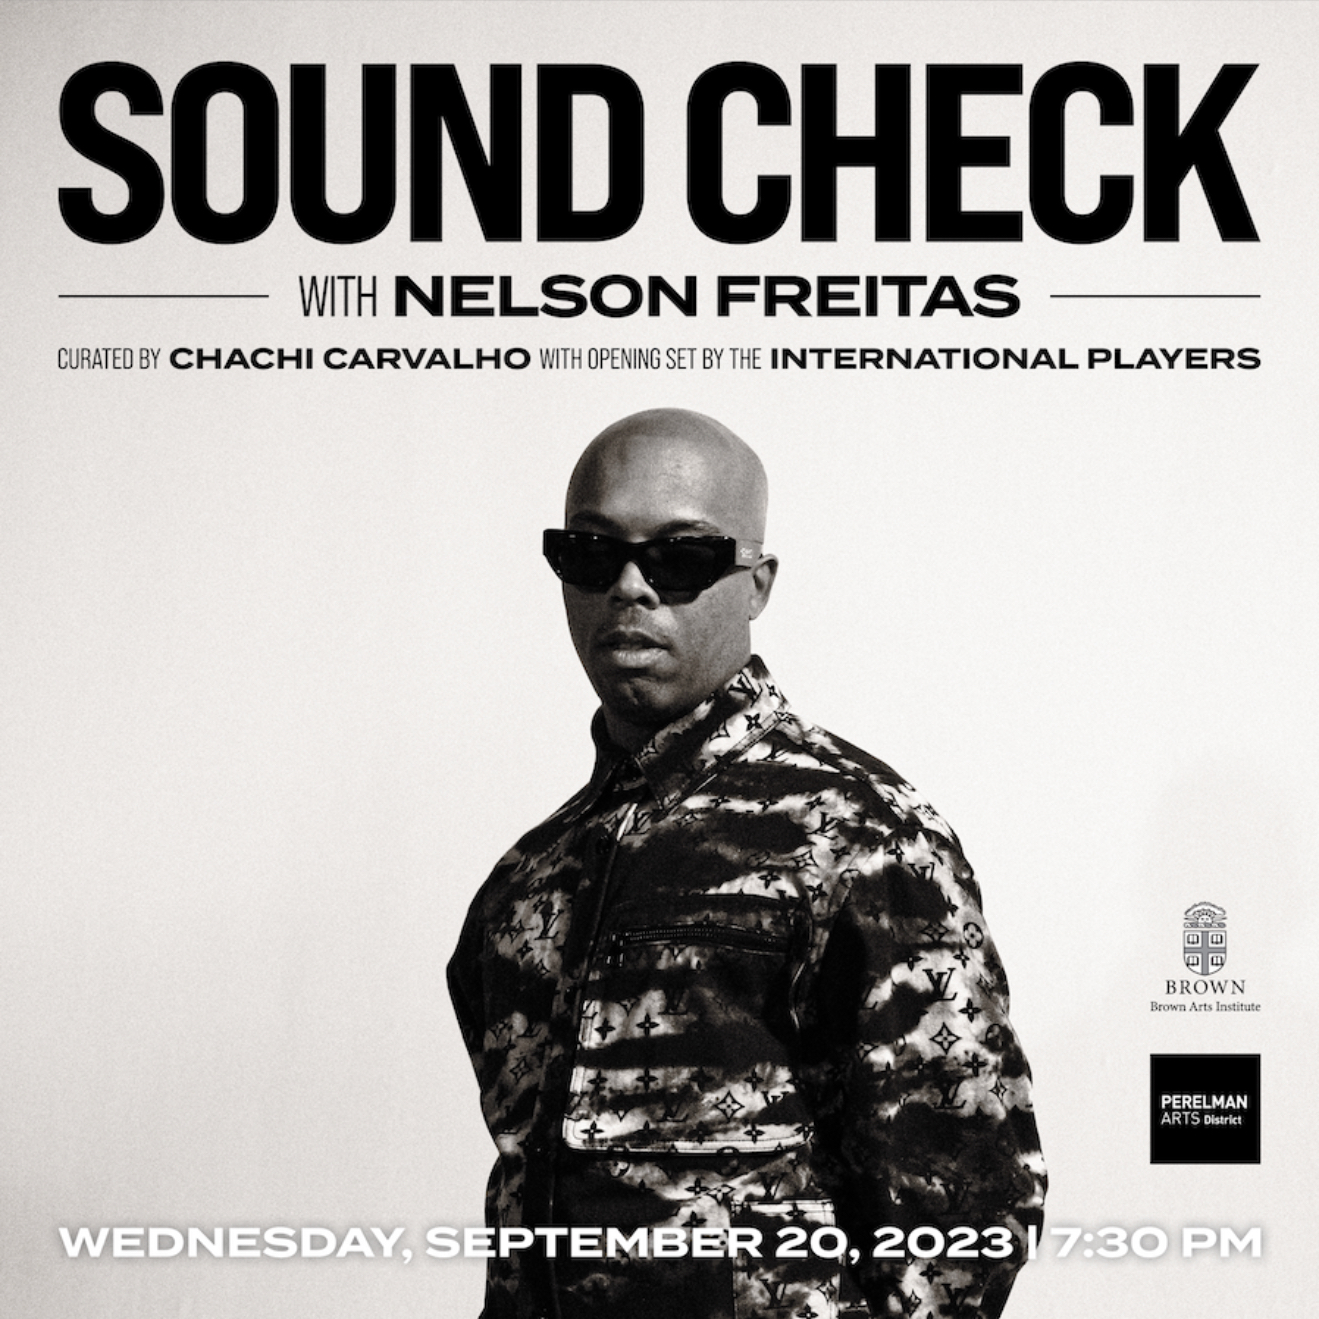 The press image for Sound Check, featuring a black and white photo of Nelson Freitas